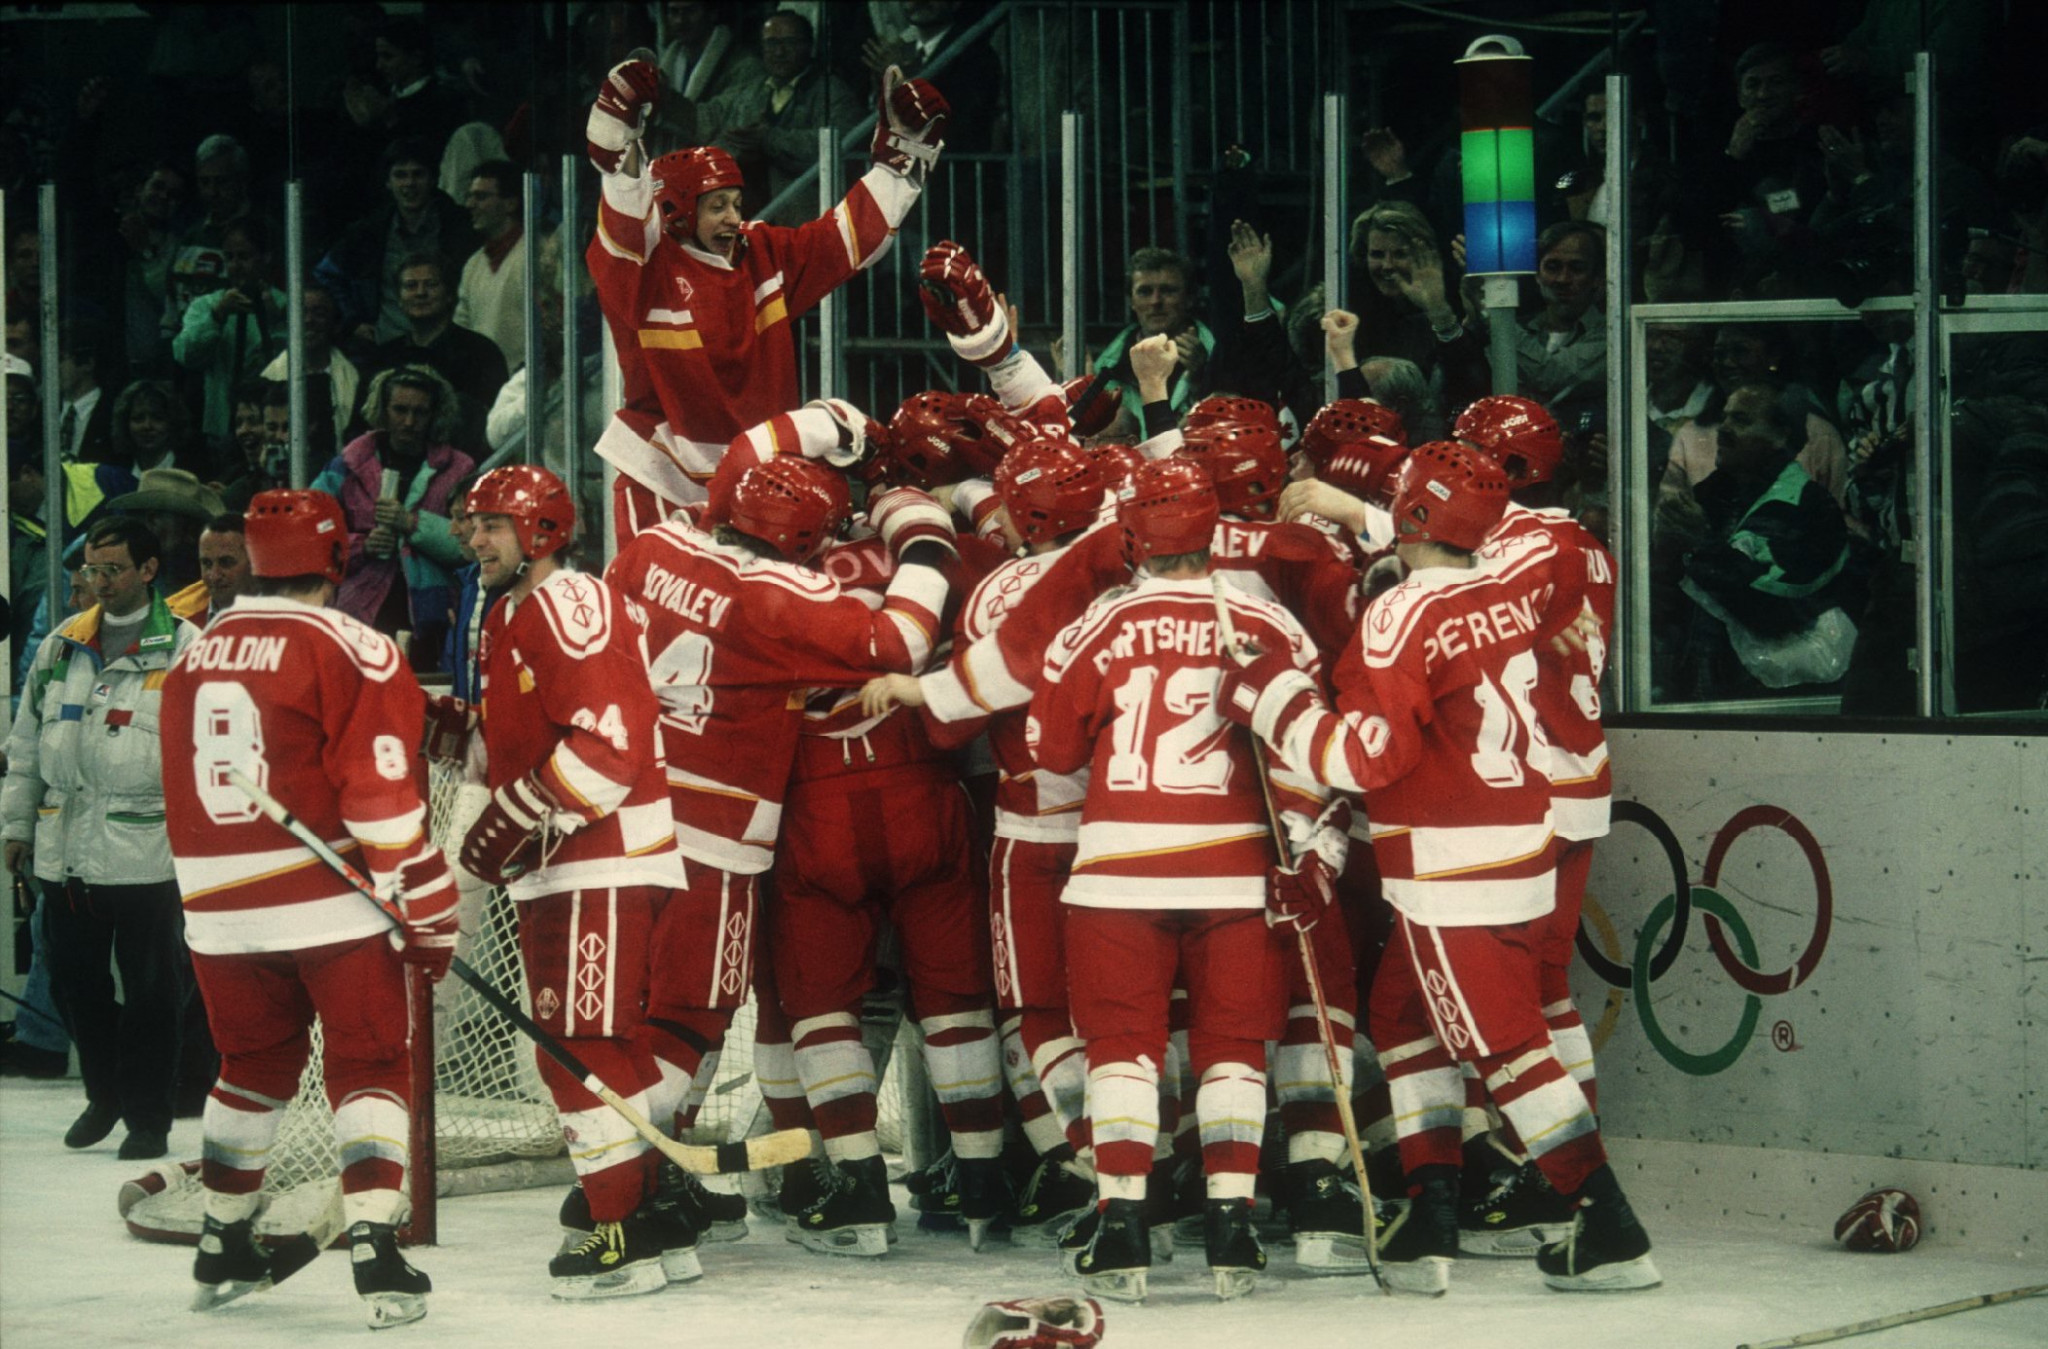 The Unified Team, composed of players from the former Soviet Union states, beat Canada 3-1 to claim the Olympic gold medal at Albertville 1992 ©Getty Images